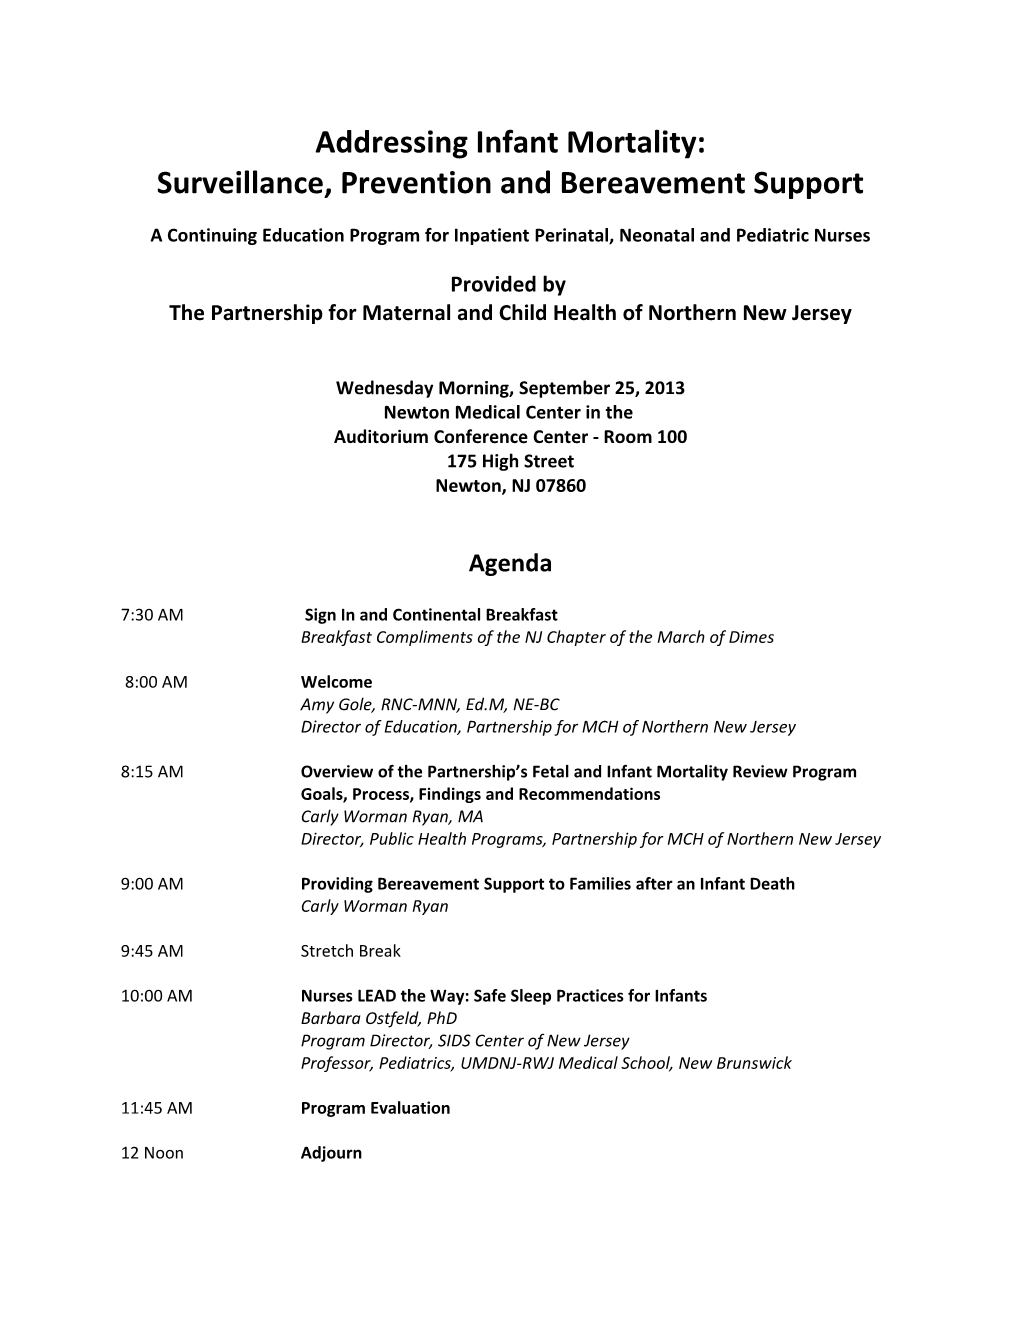 Surveillance, Prevention and Bereavement Support